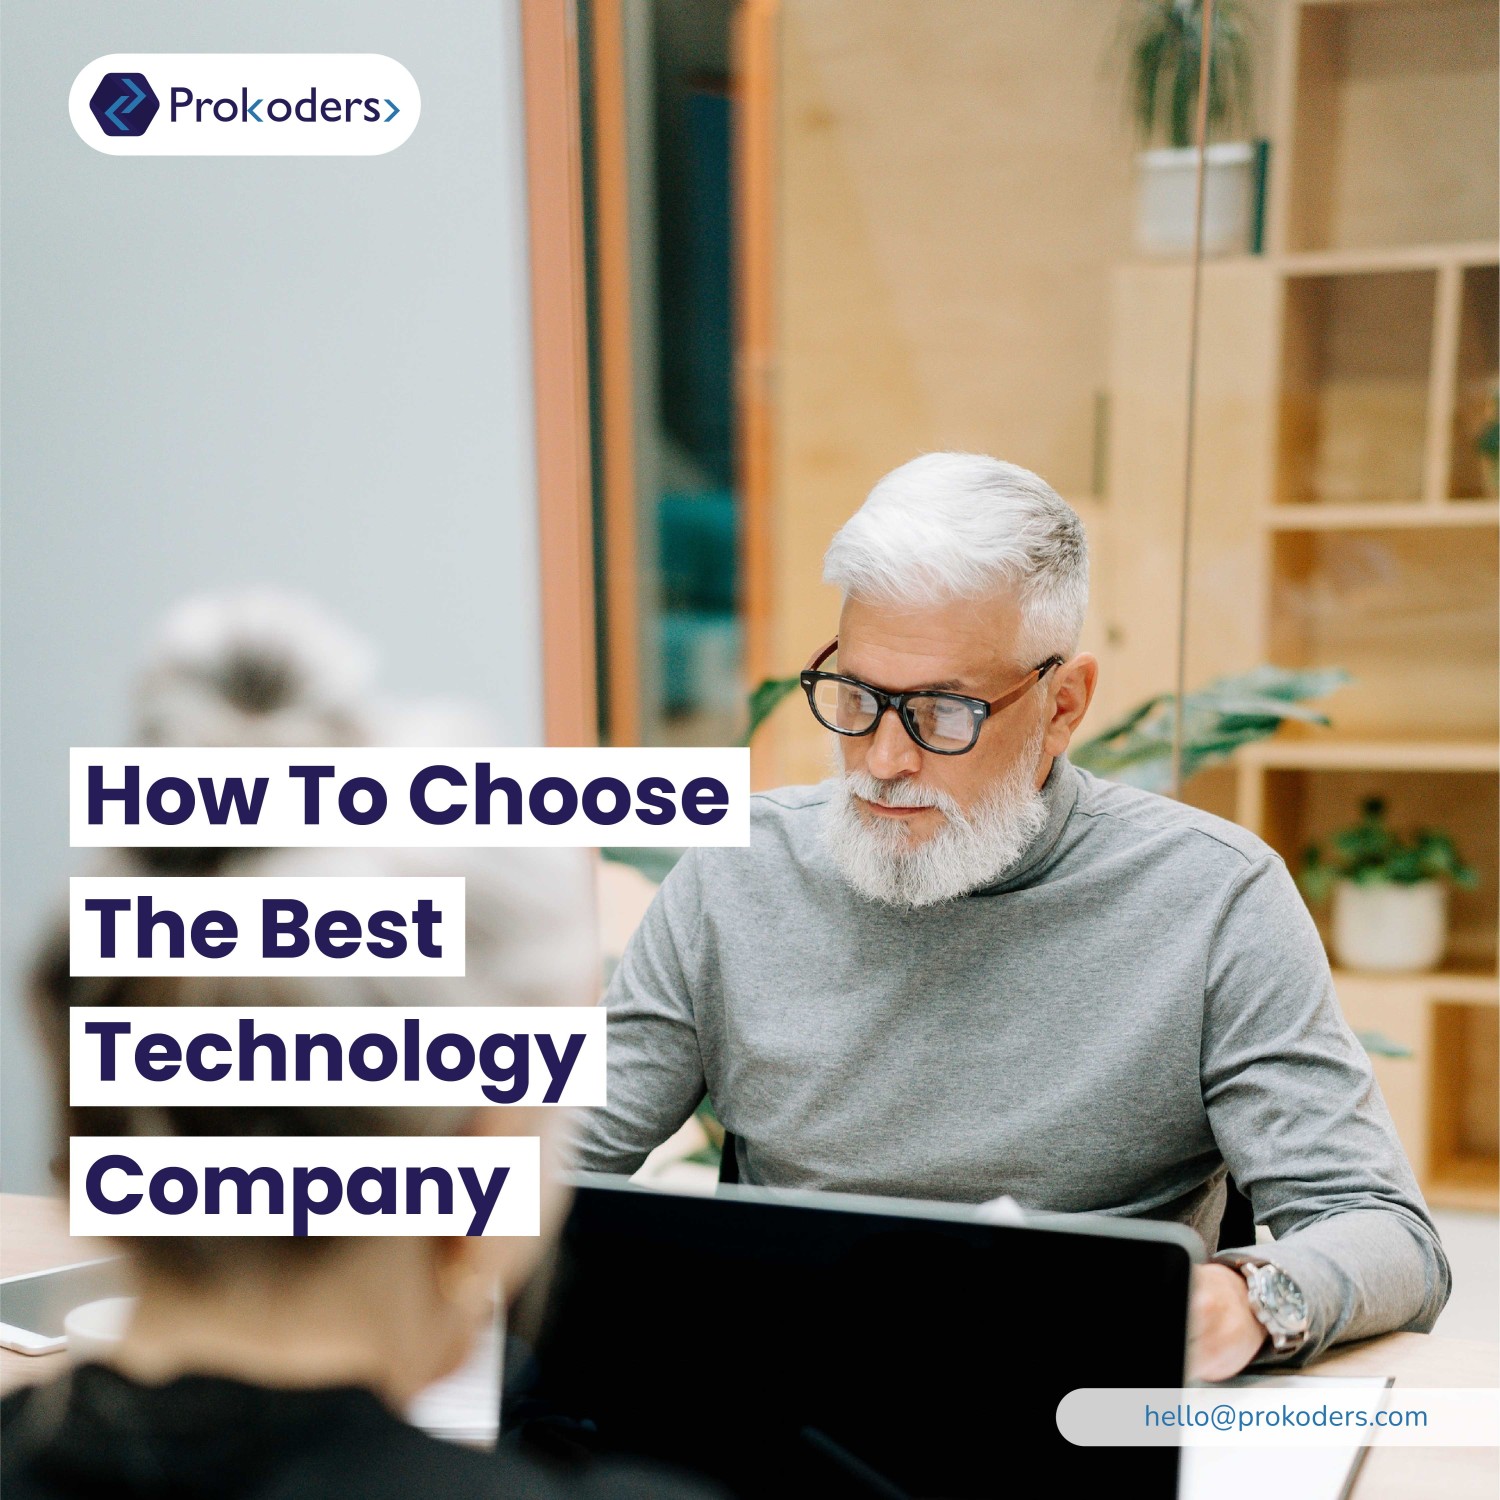 How to choose the best technology company